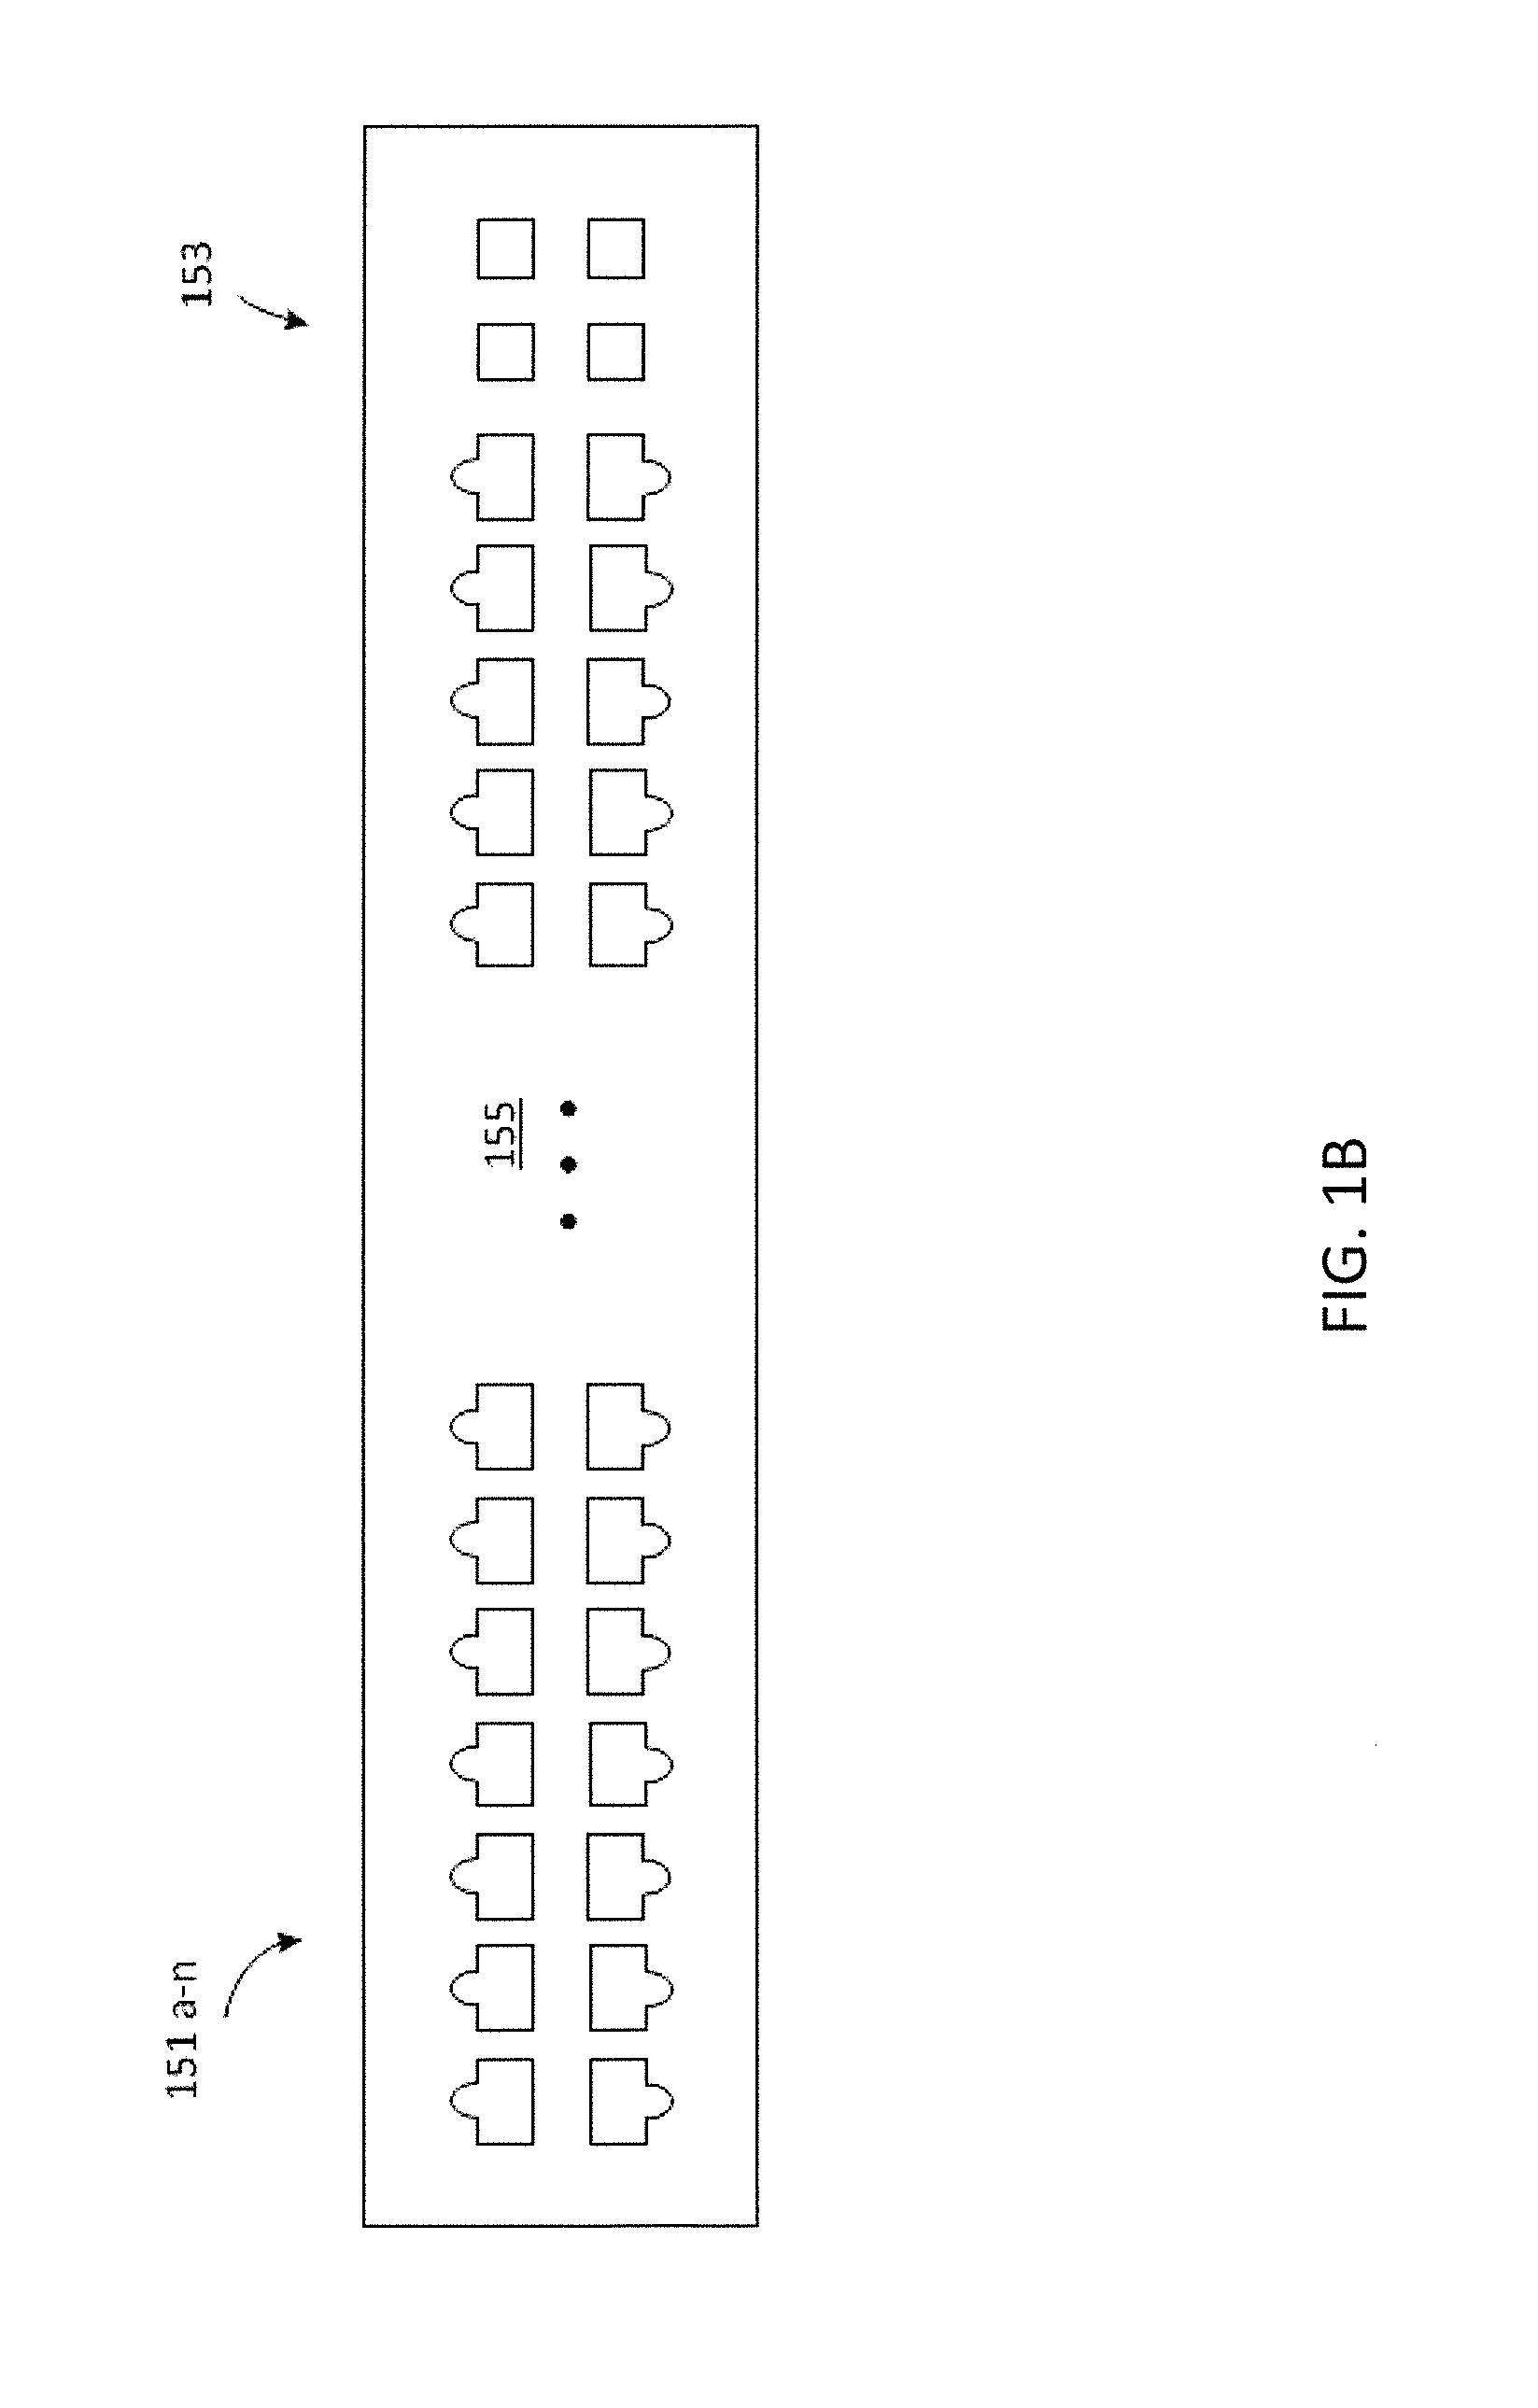 Optical interconnect for switch applications